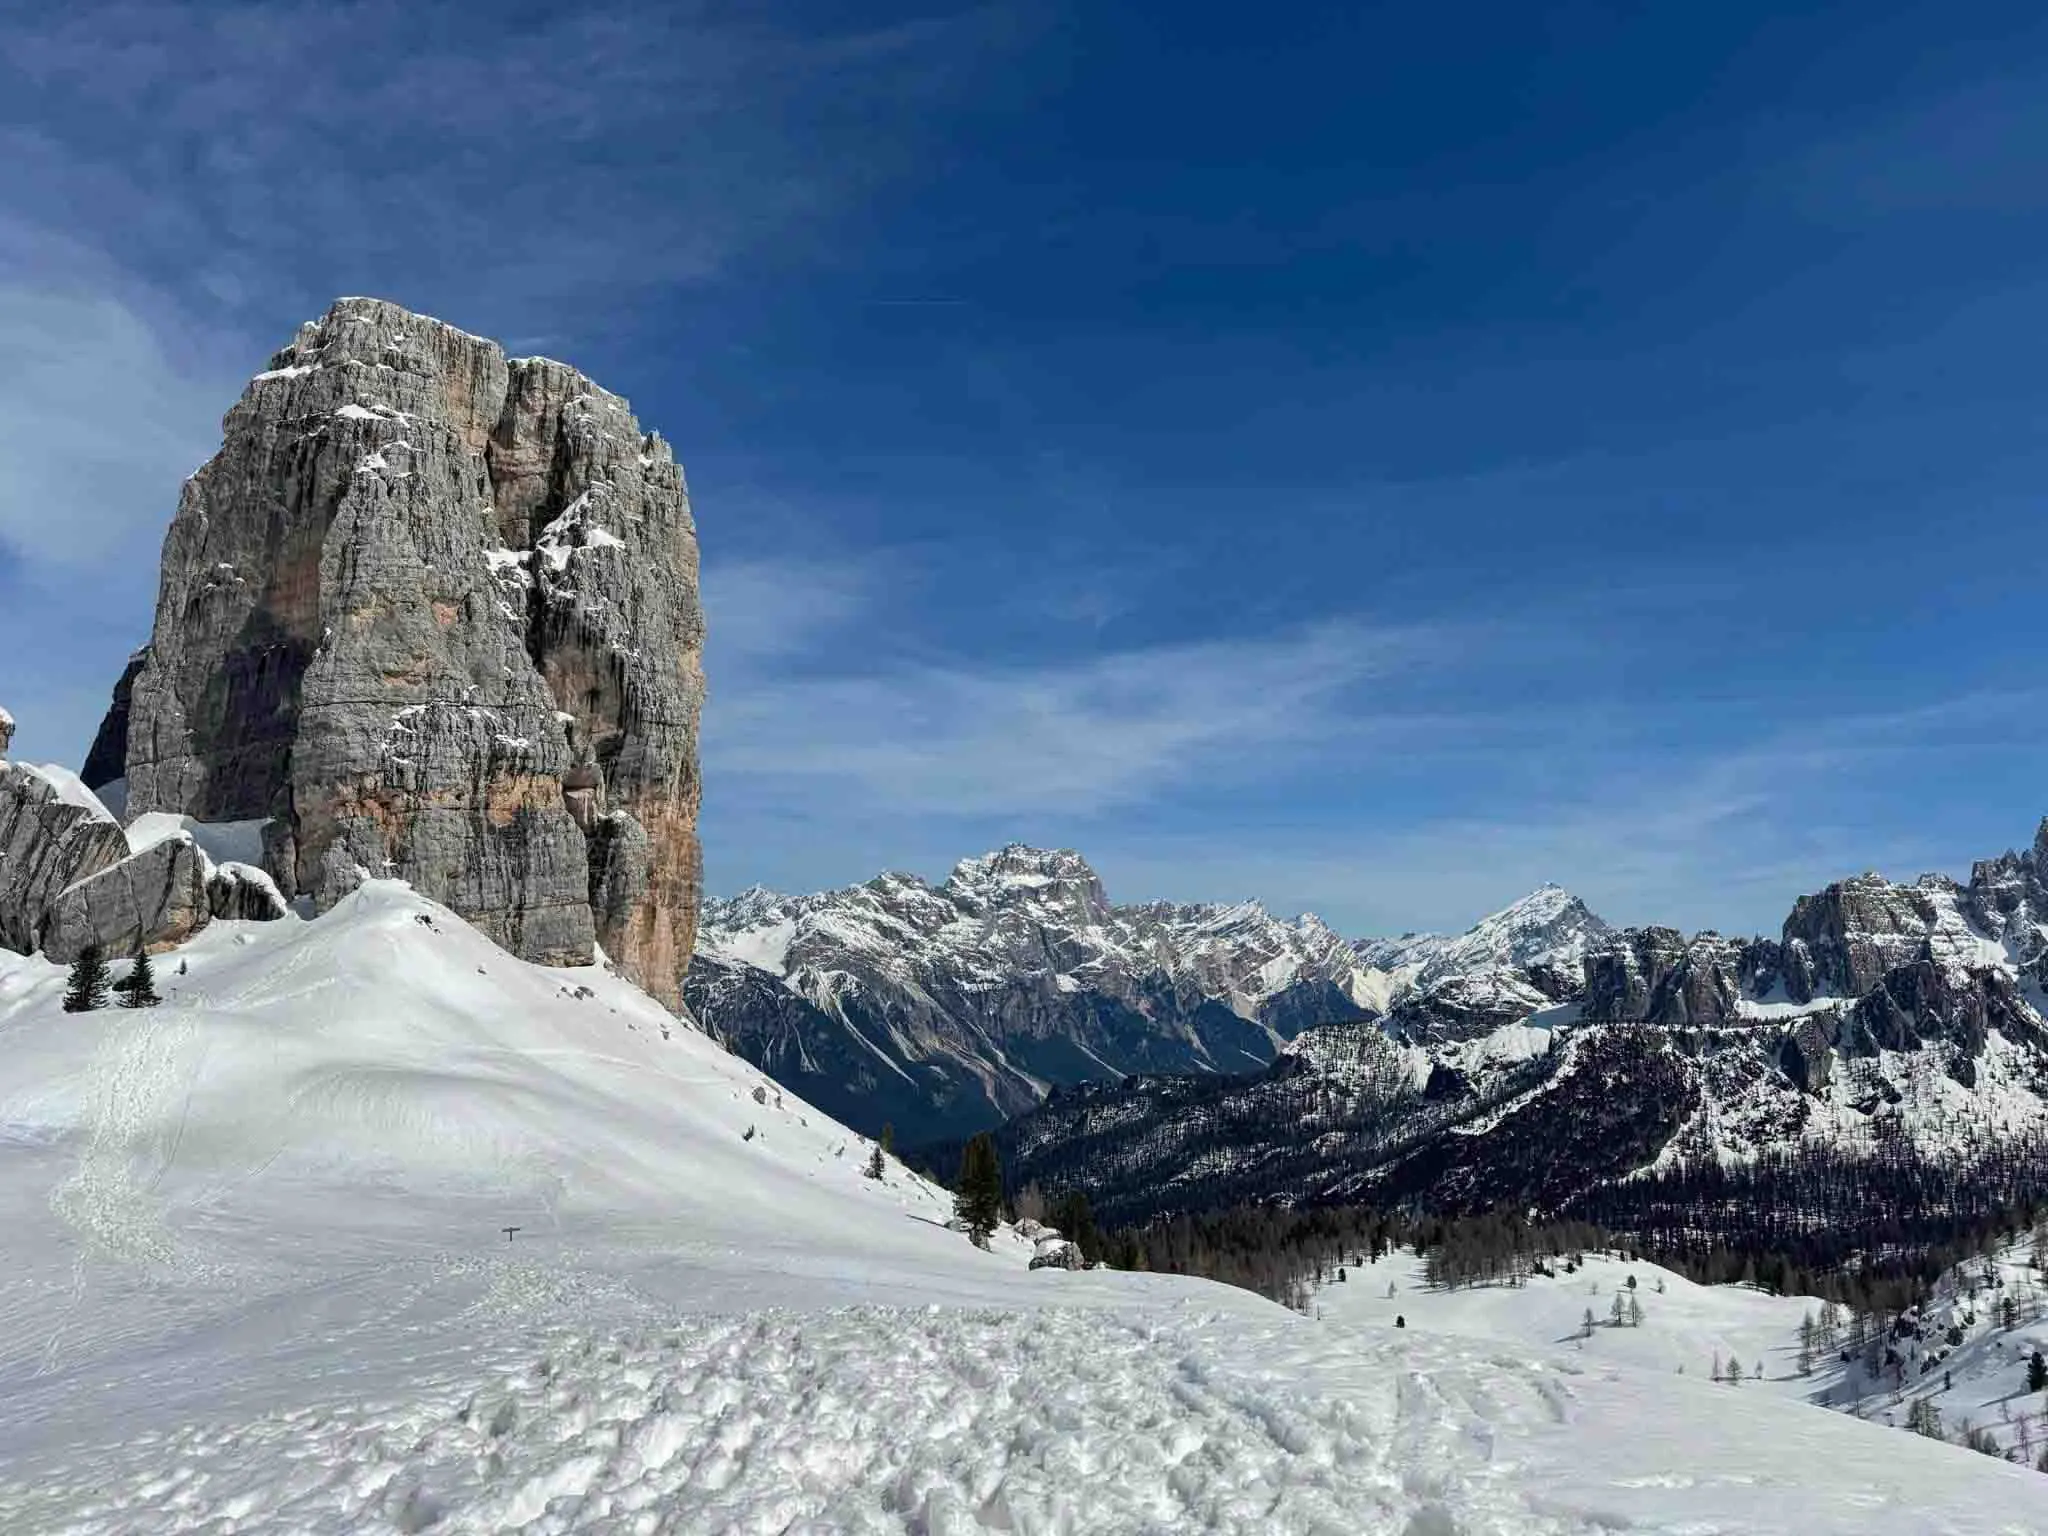 a Dolomite rock stack surrounded by snowy slopes